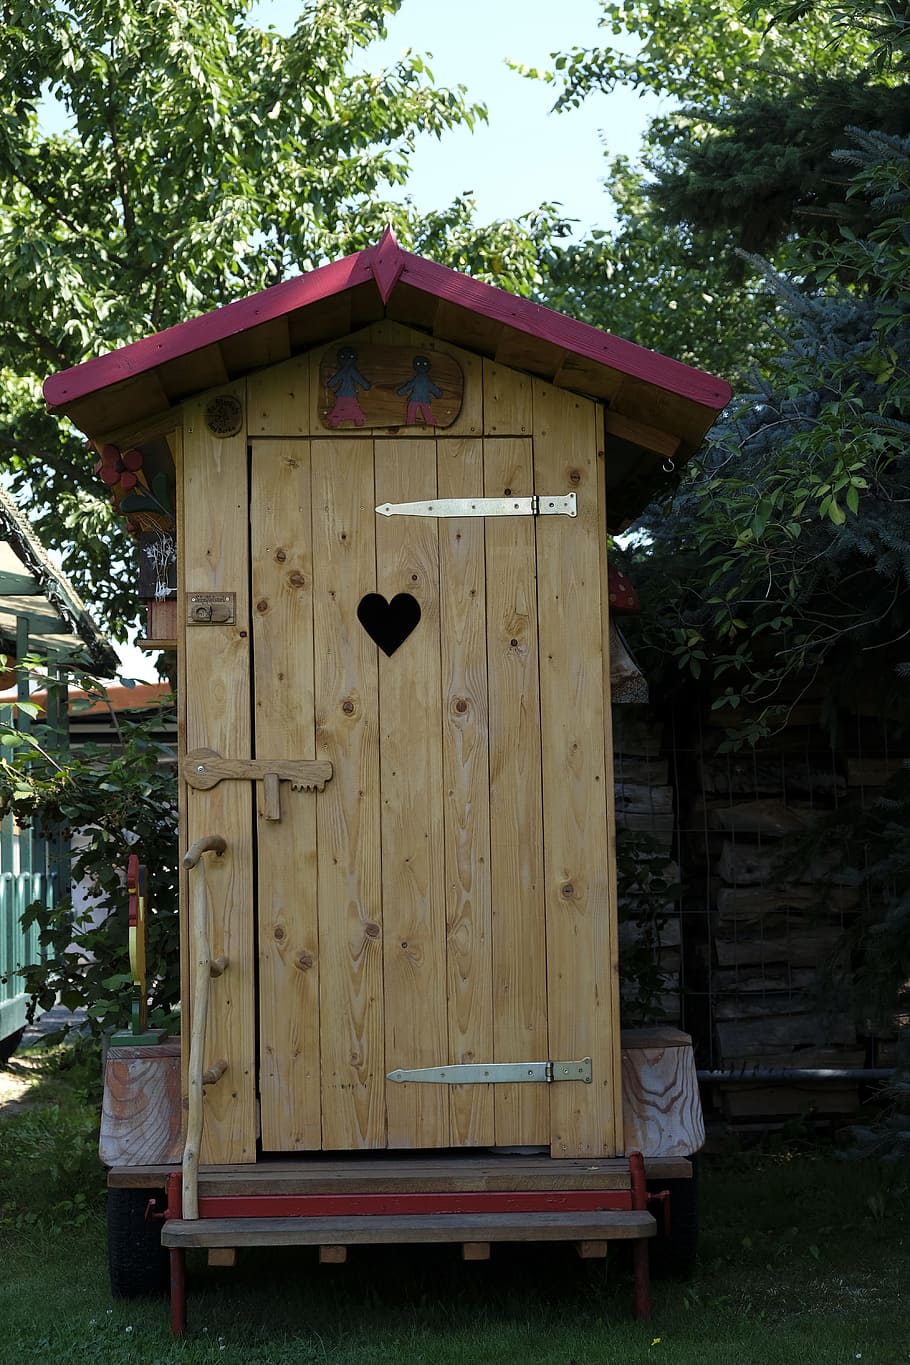 loo, wc, wchäusschen, outhouse, toilet, toilet cabin, session, sanitaryblock, forest, privy